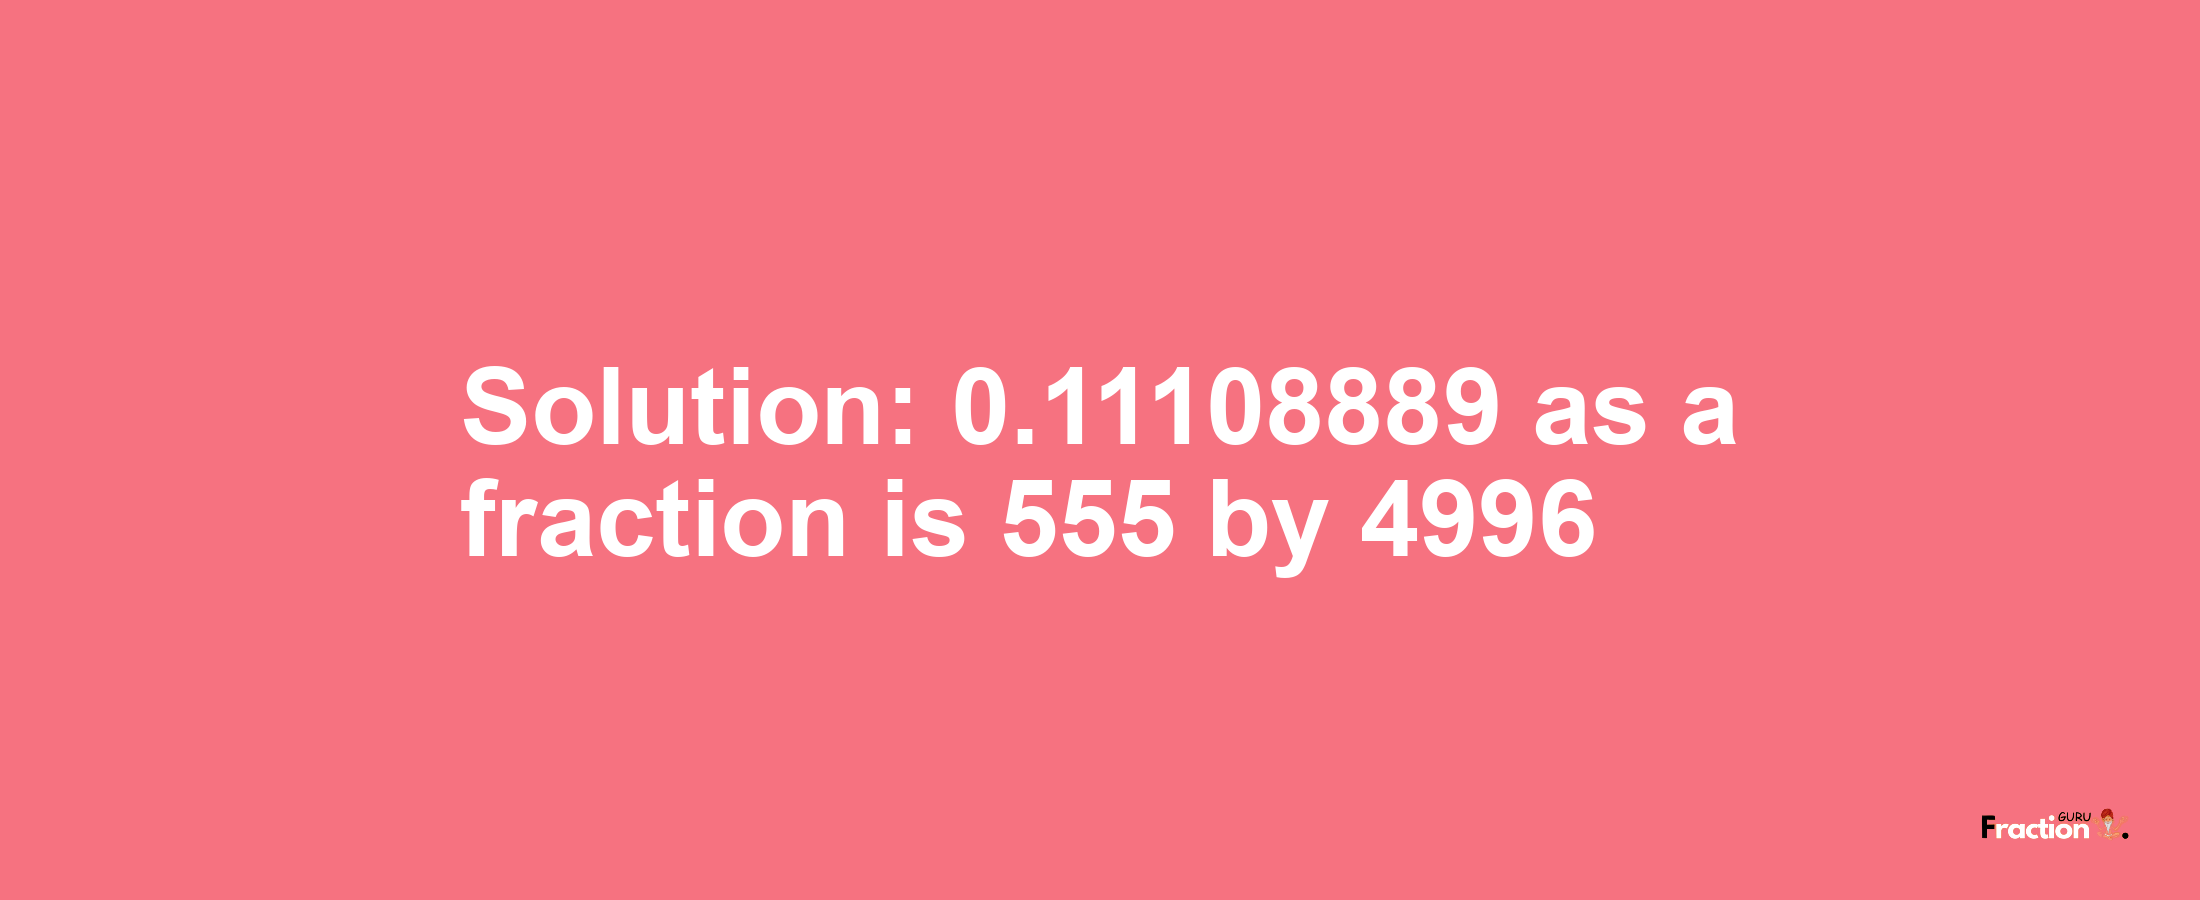 Solution:0.11108889 as a fraction is 555/4996